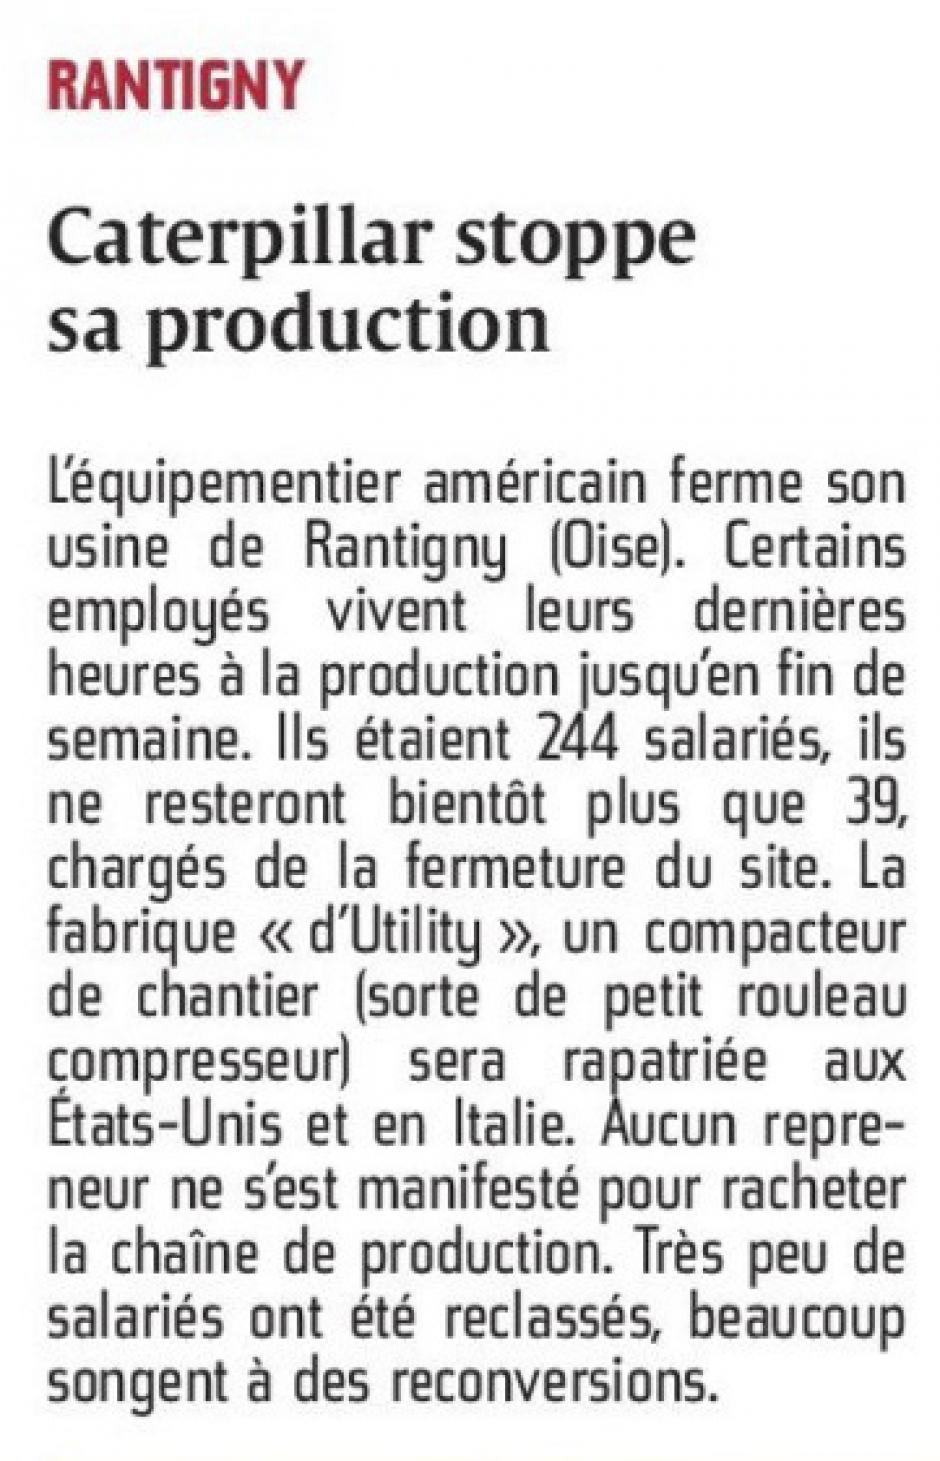 20150730-CP-Rantigny-Caterpillar stoppe sa production [pages régionales]